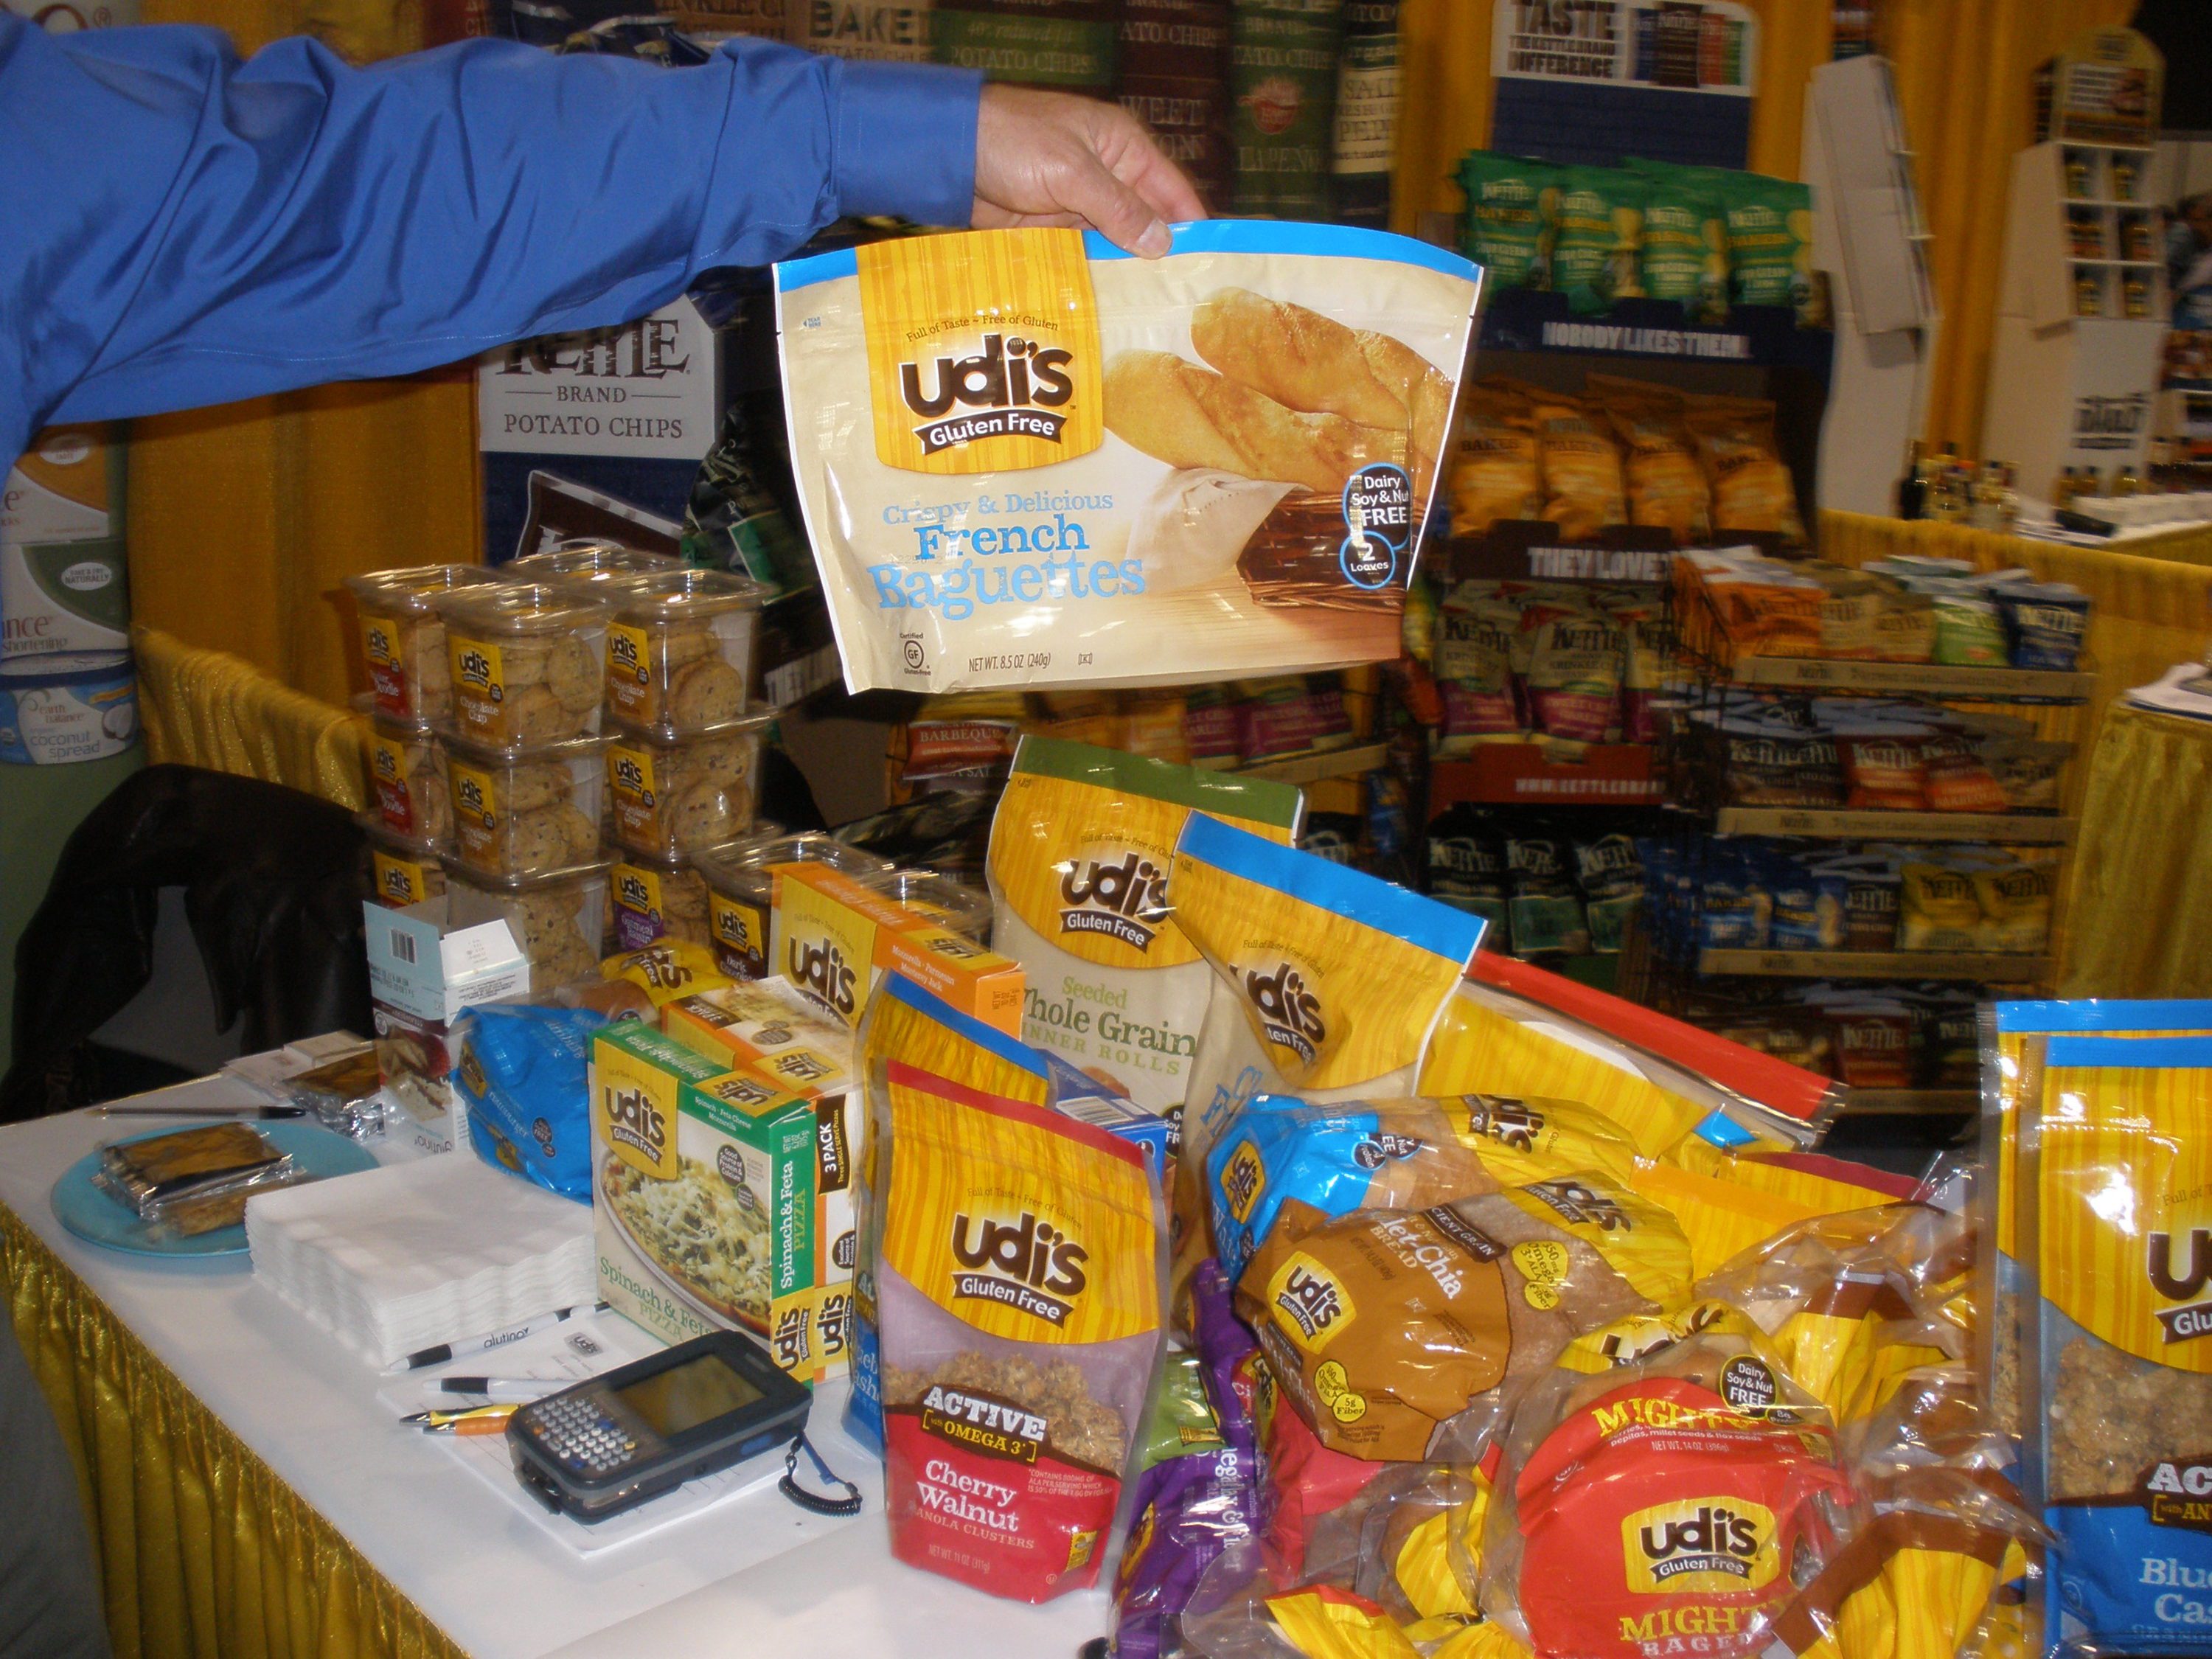 Udi's products on a table.